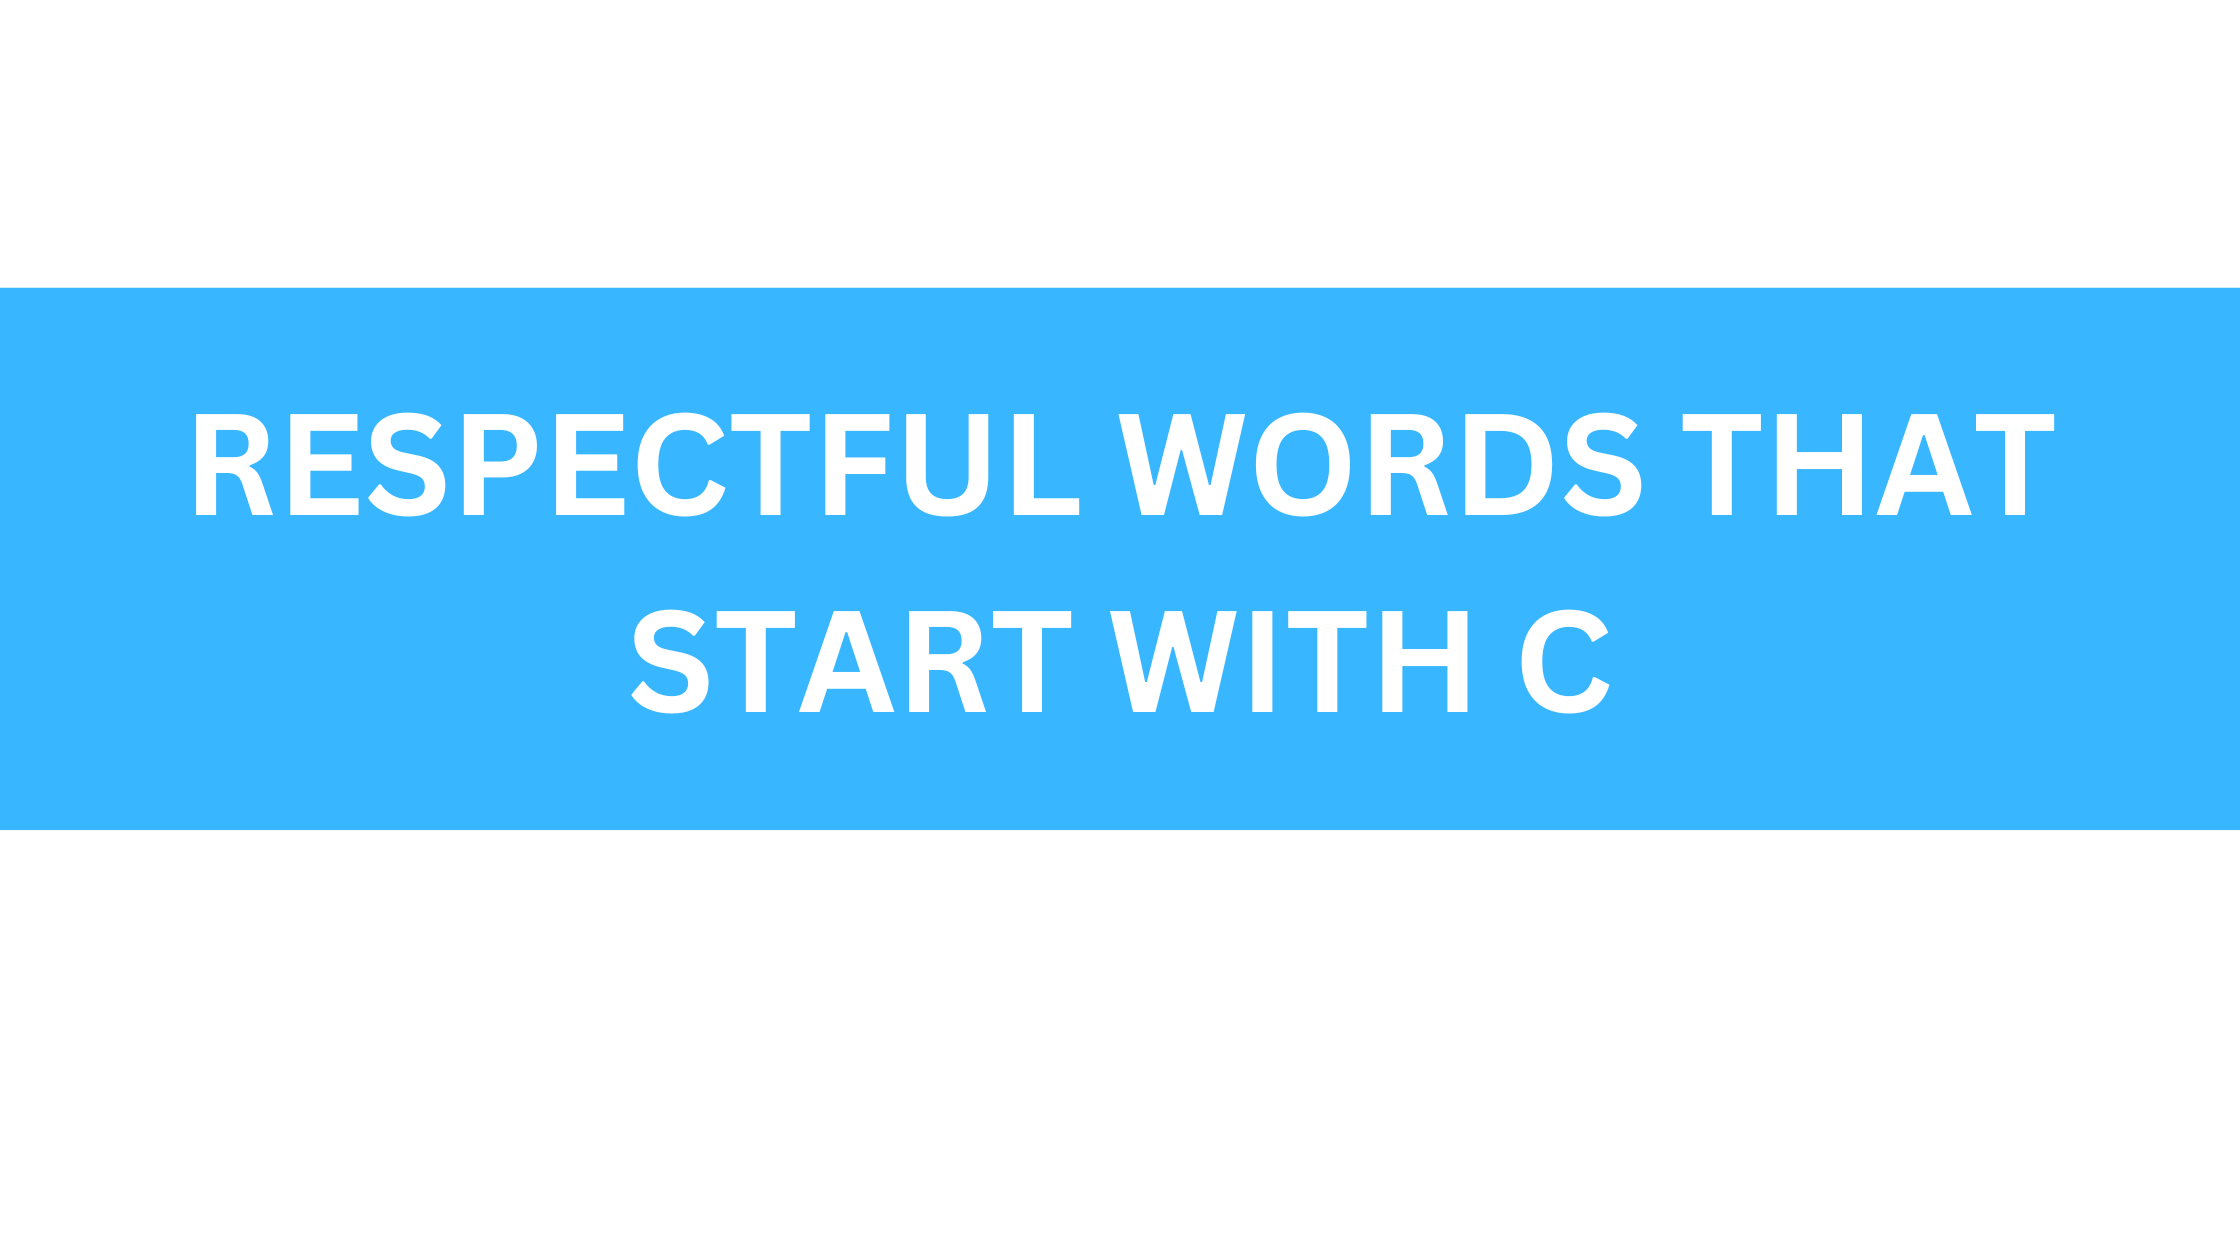 respectful words that start with c